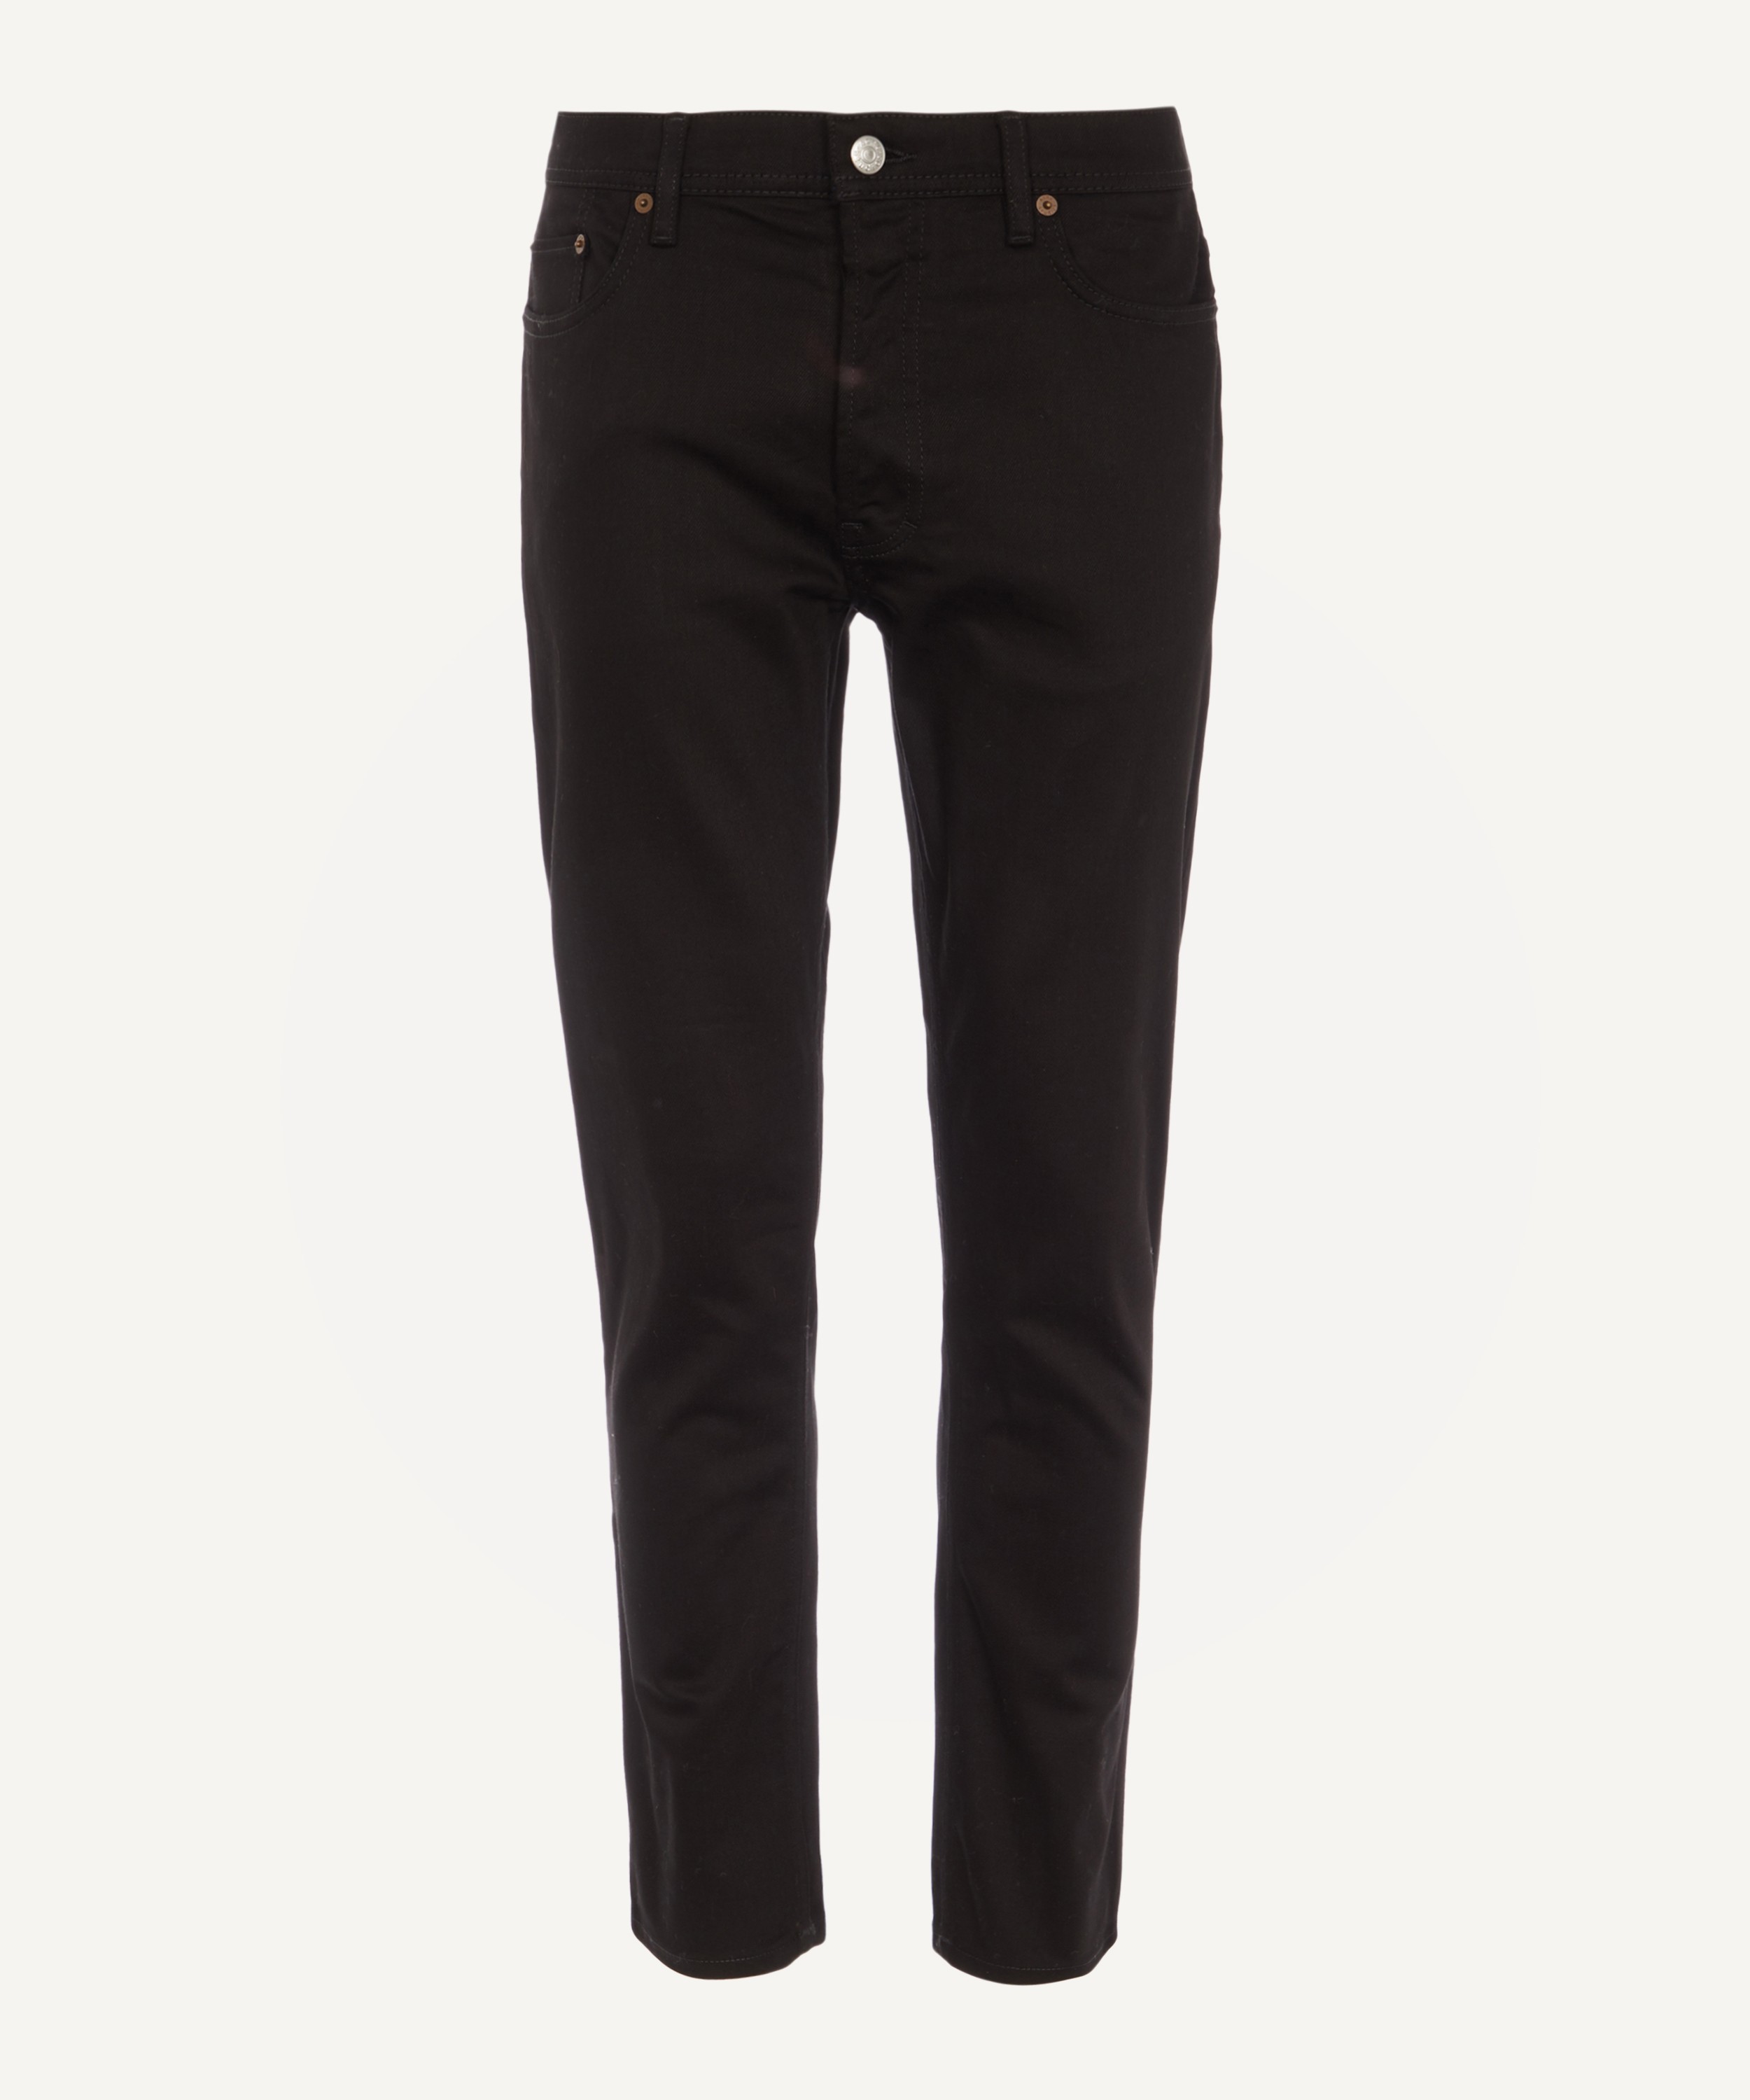 Acne Studios River Stay Black Straight Fit Jeans | Liberty